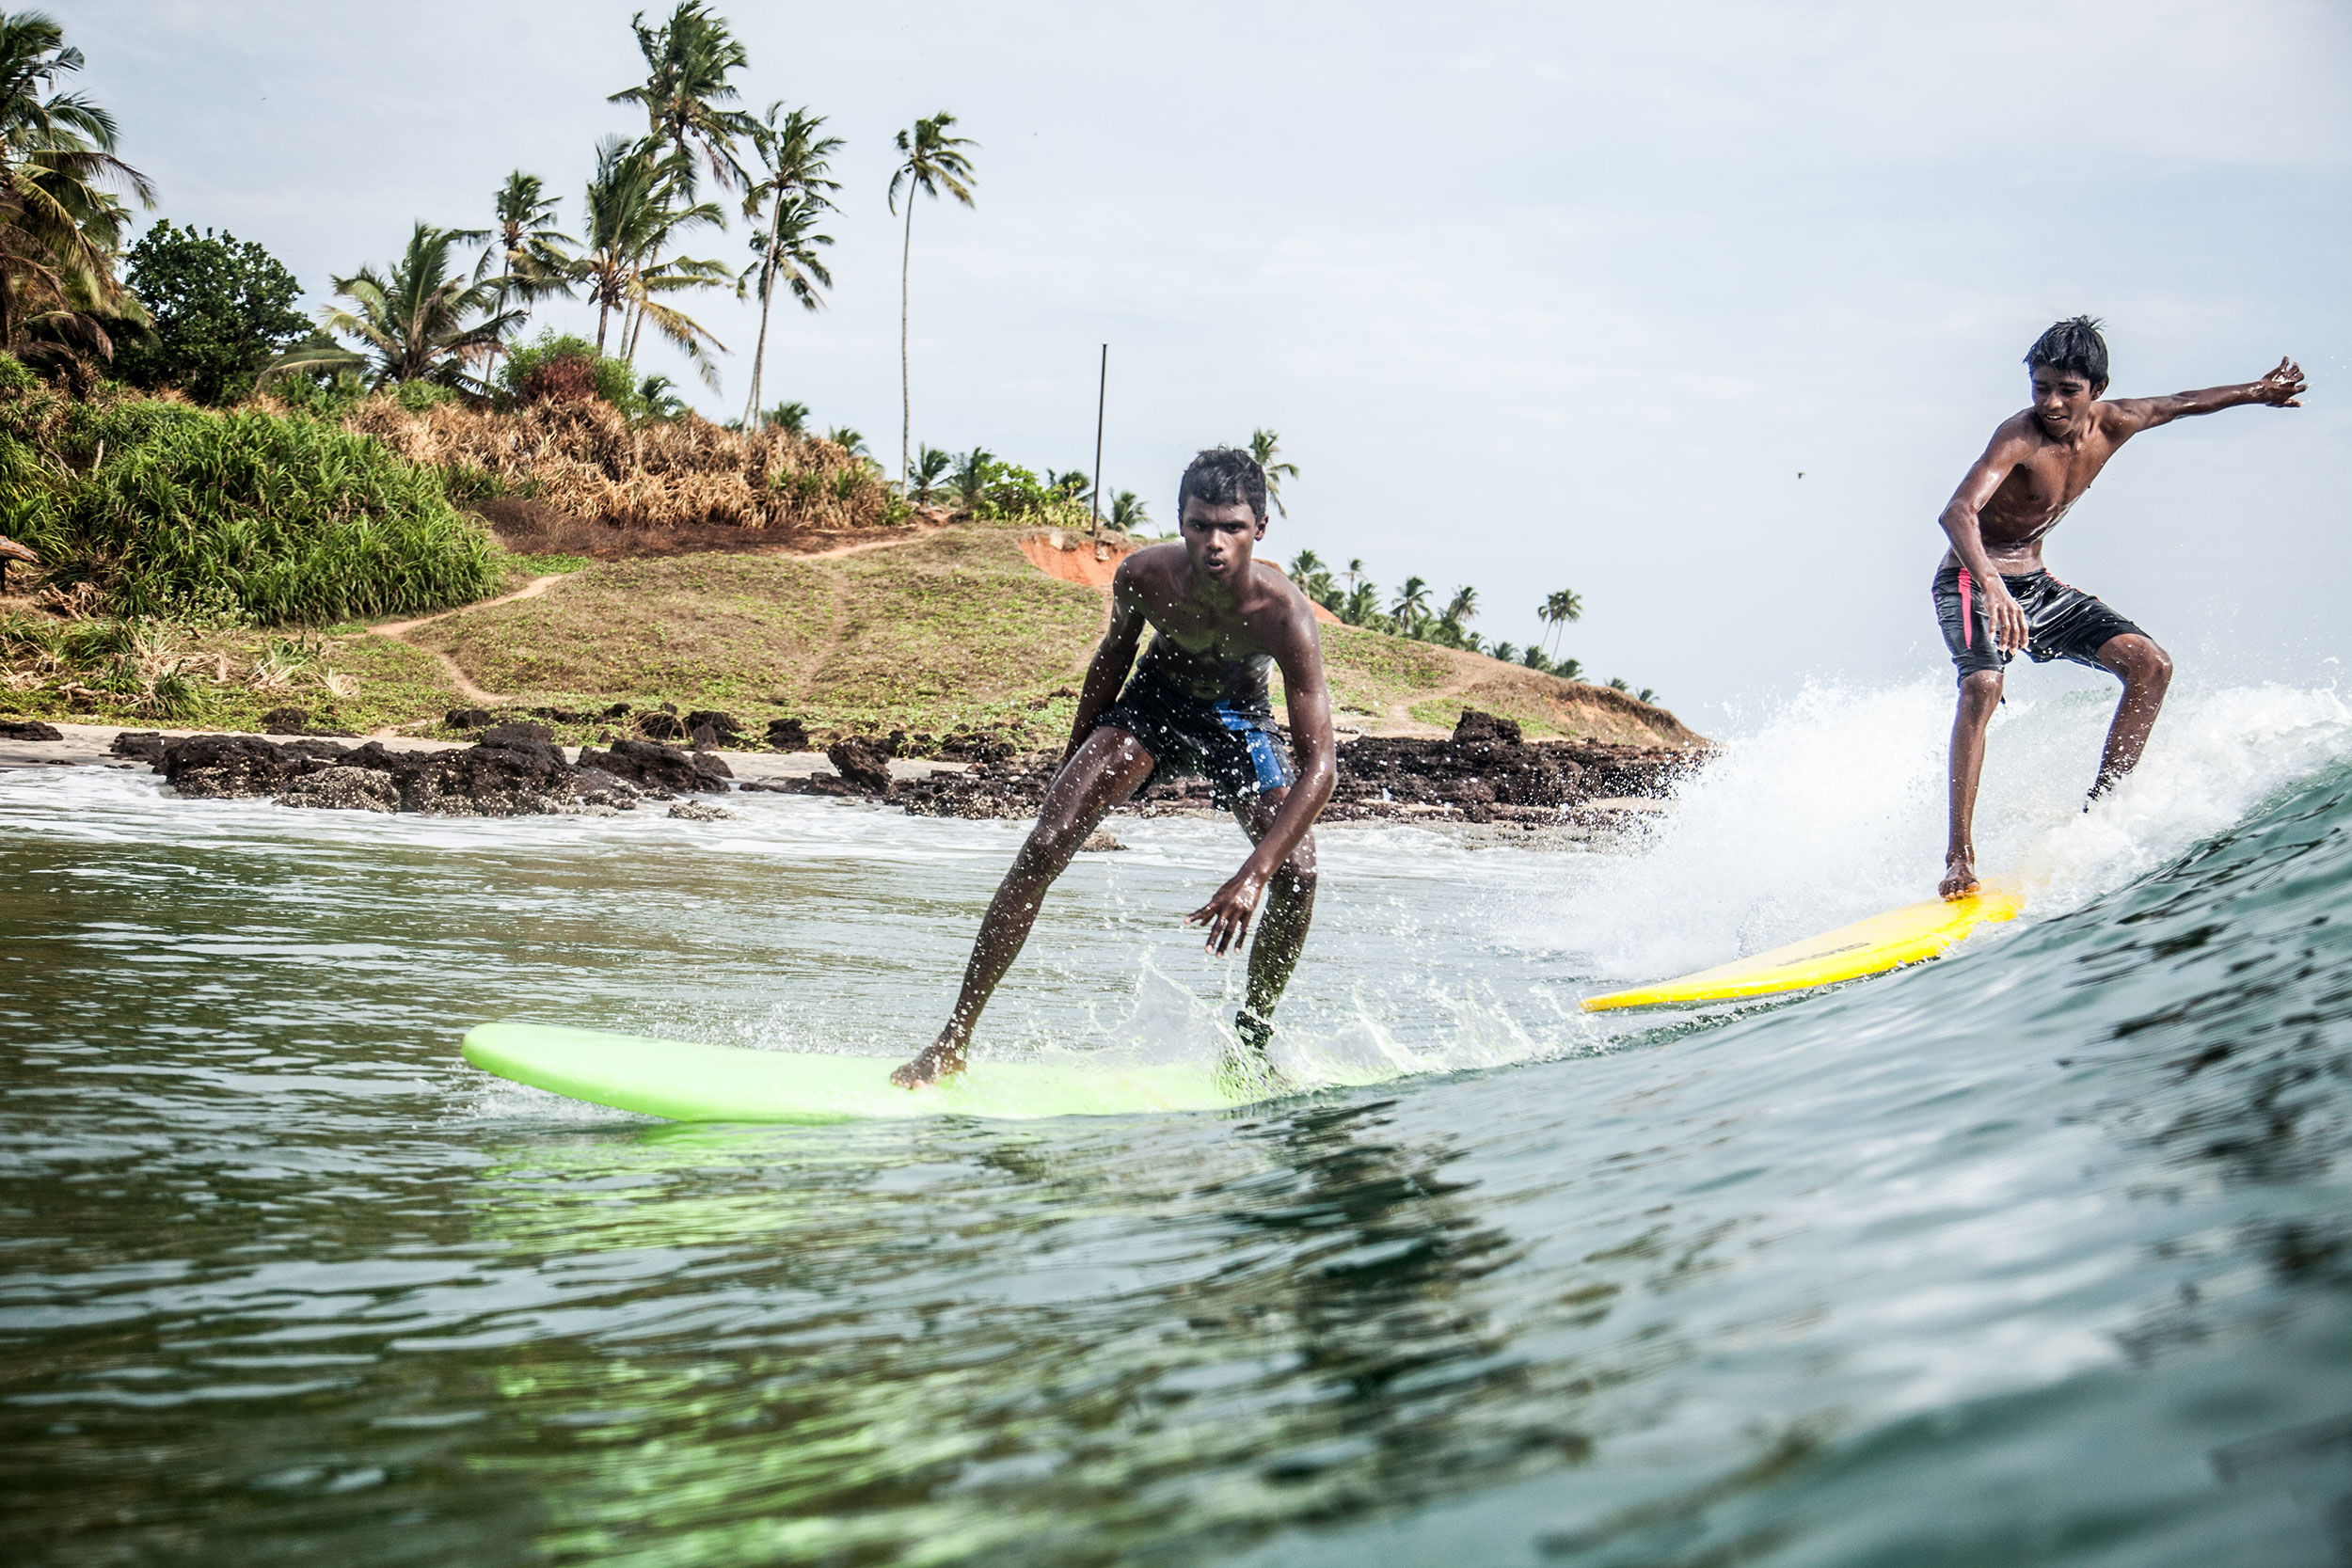 Yousuf and Nabill sharing the wave. PHOTO: Berta Tilmante